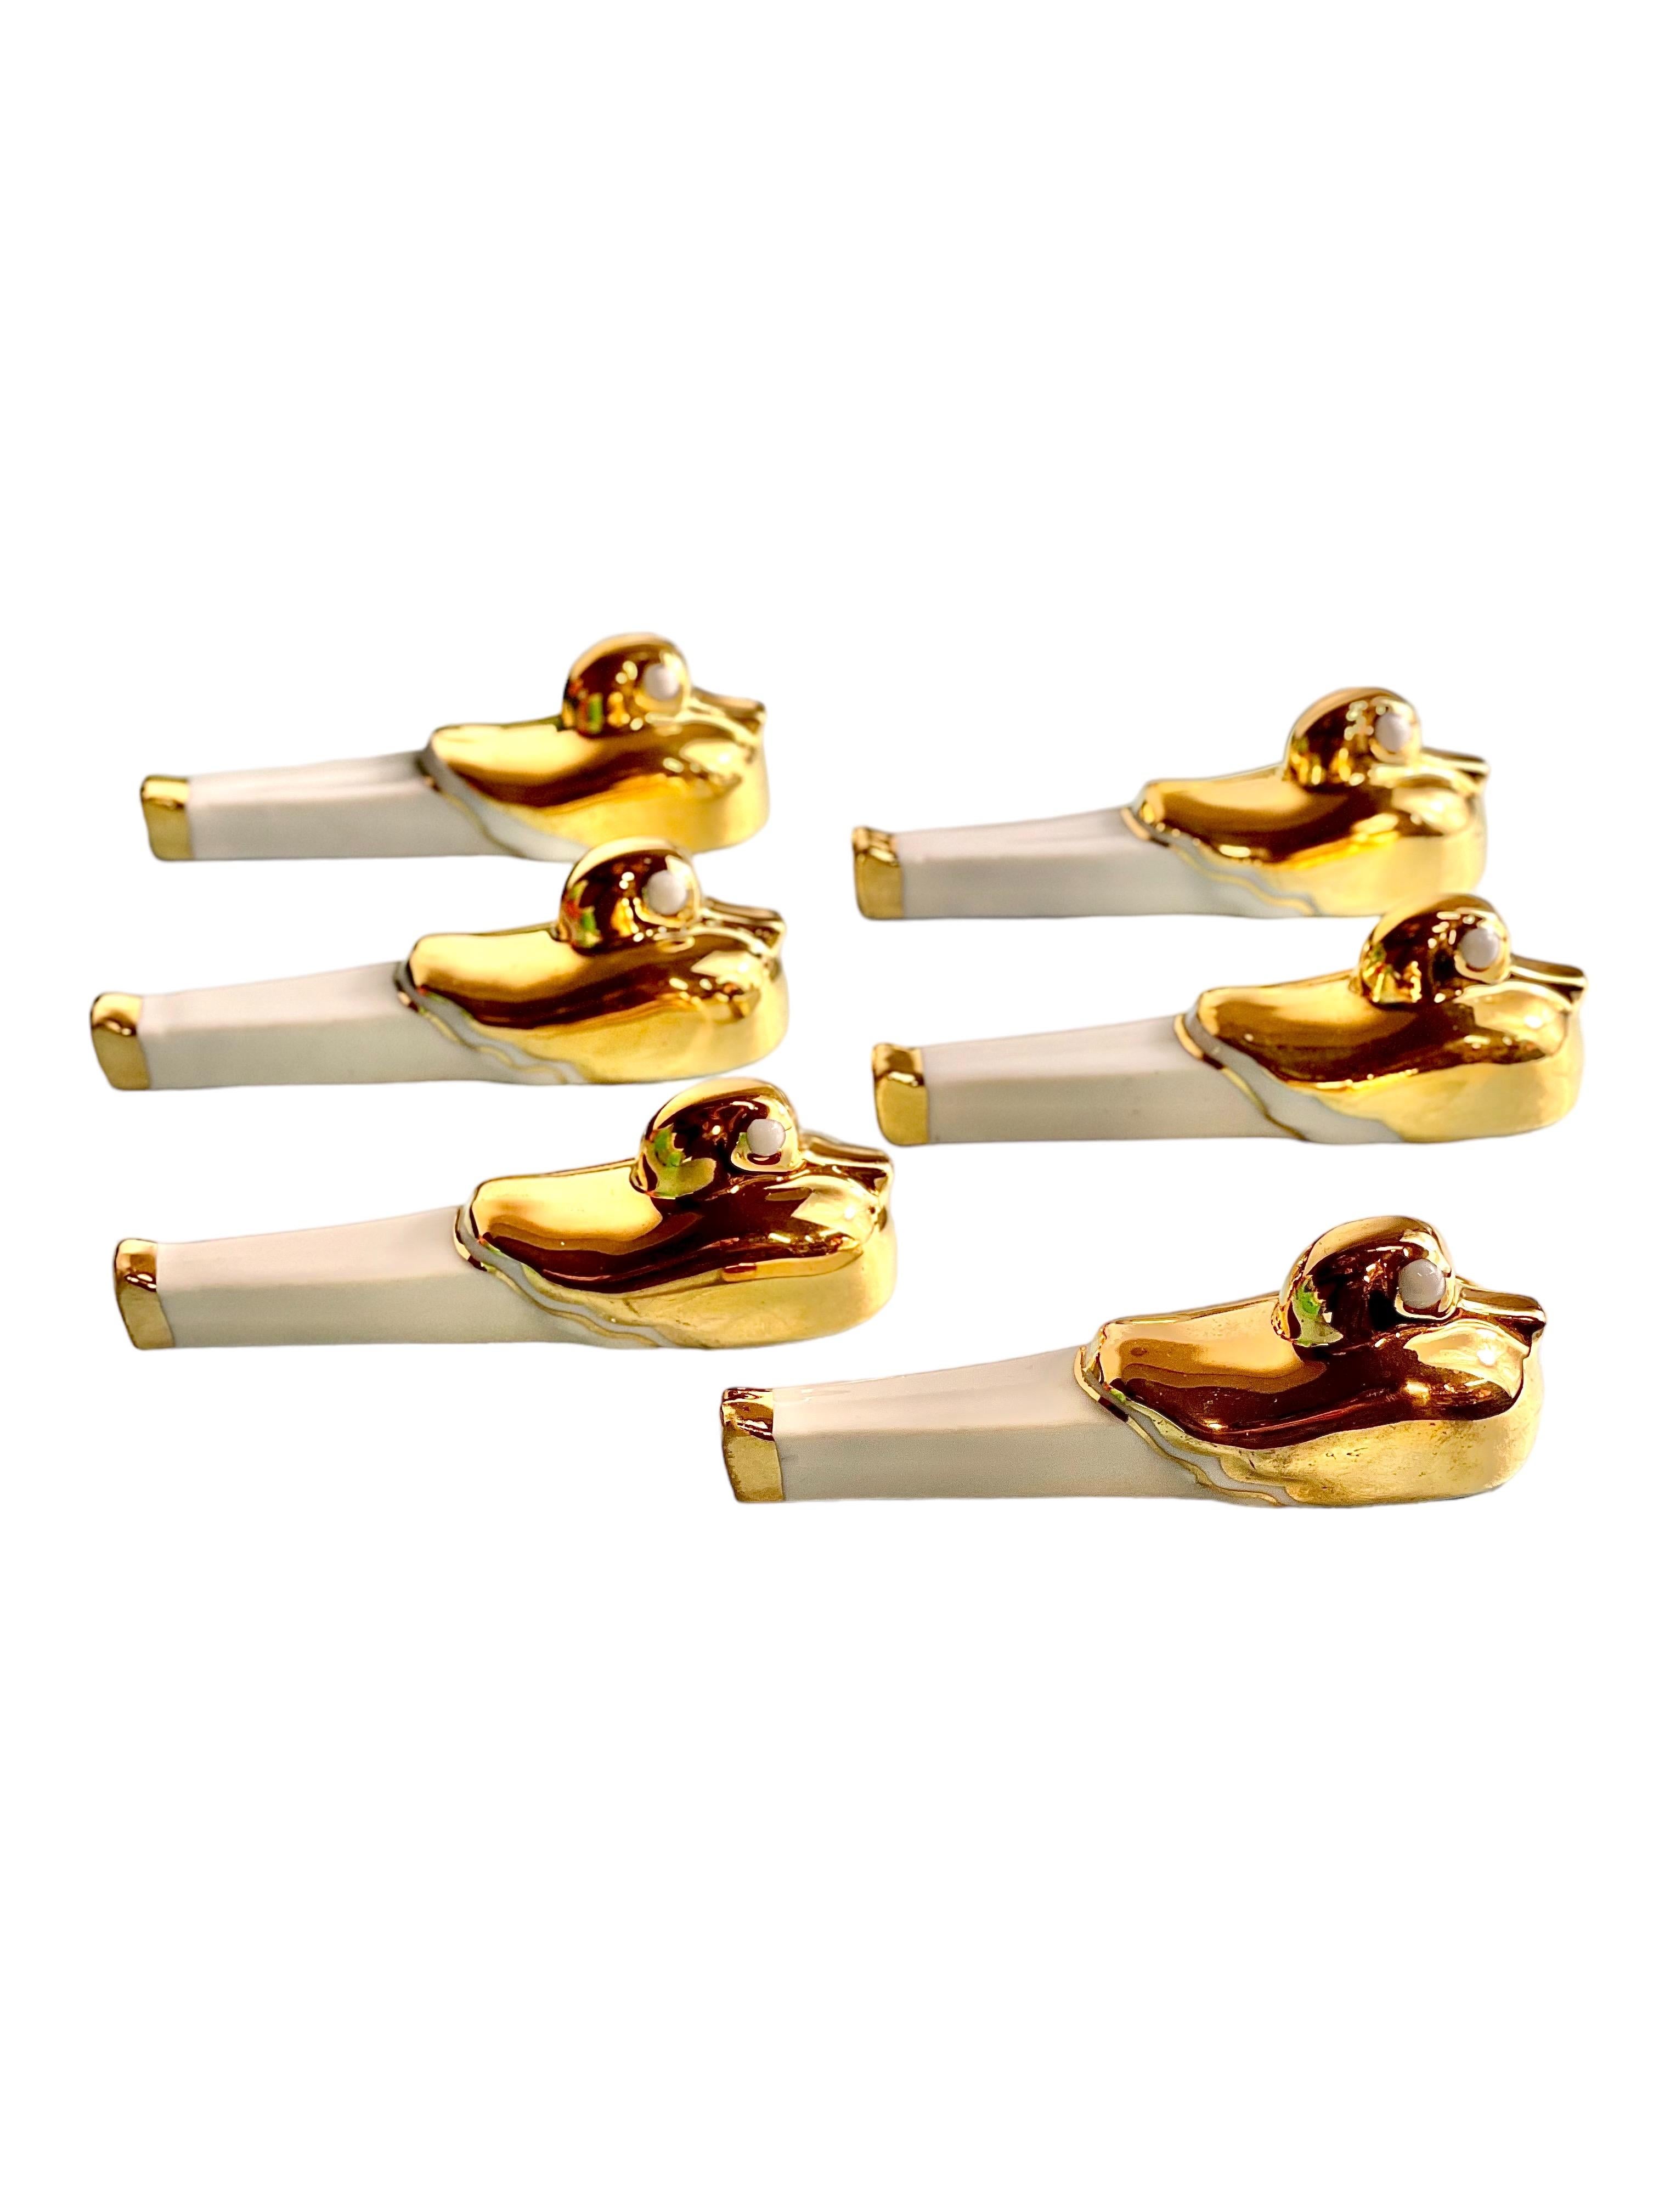 An unusual and very charming table set consisting of six Art-Deco style duck-shaped porcelain knife rests, and two small salt cellars with their original tiny spoons. Hand-crafted from gleaming, gold-plated white porcelain, this set was made by the